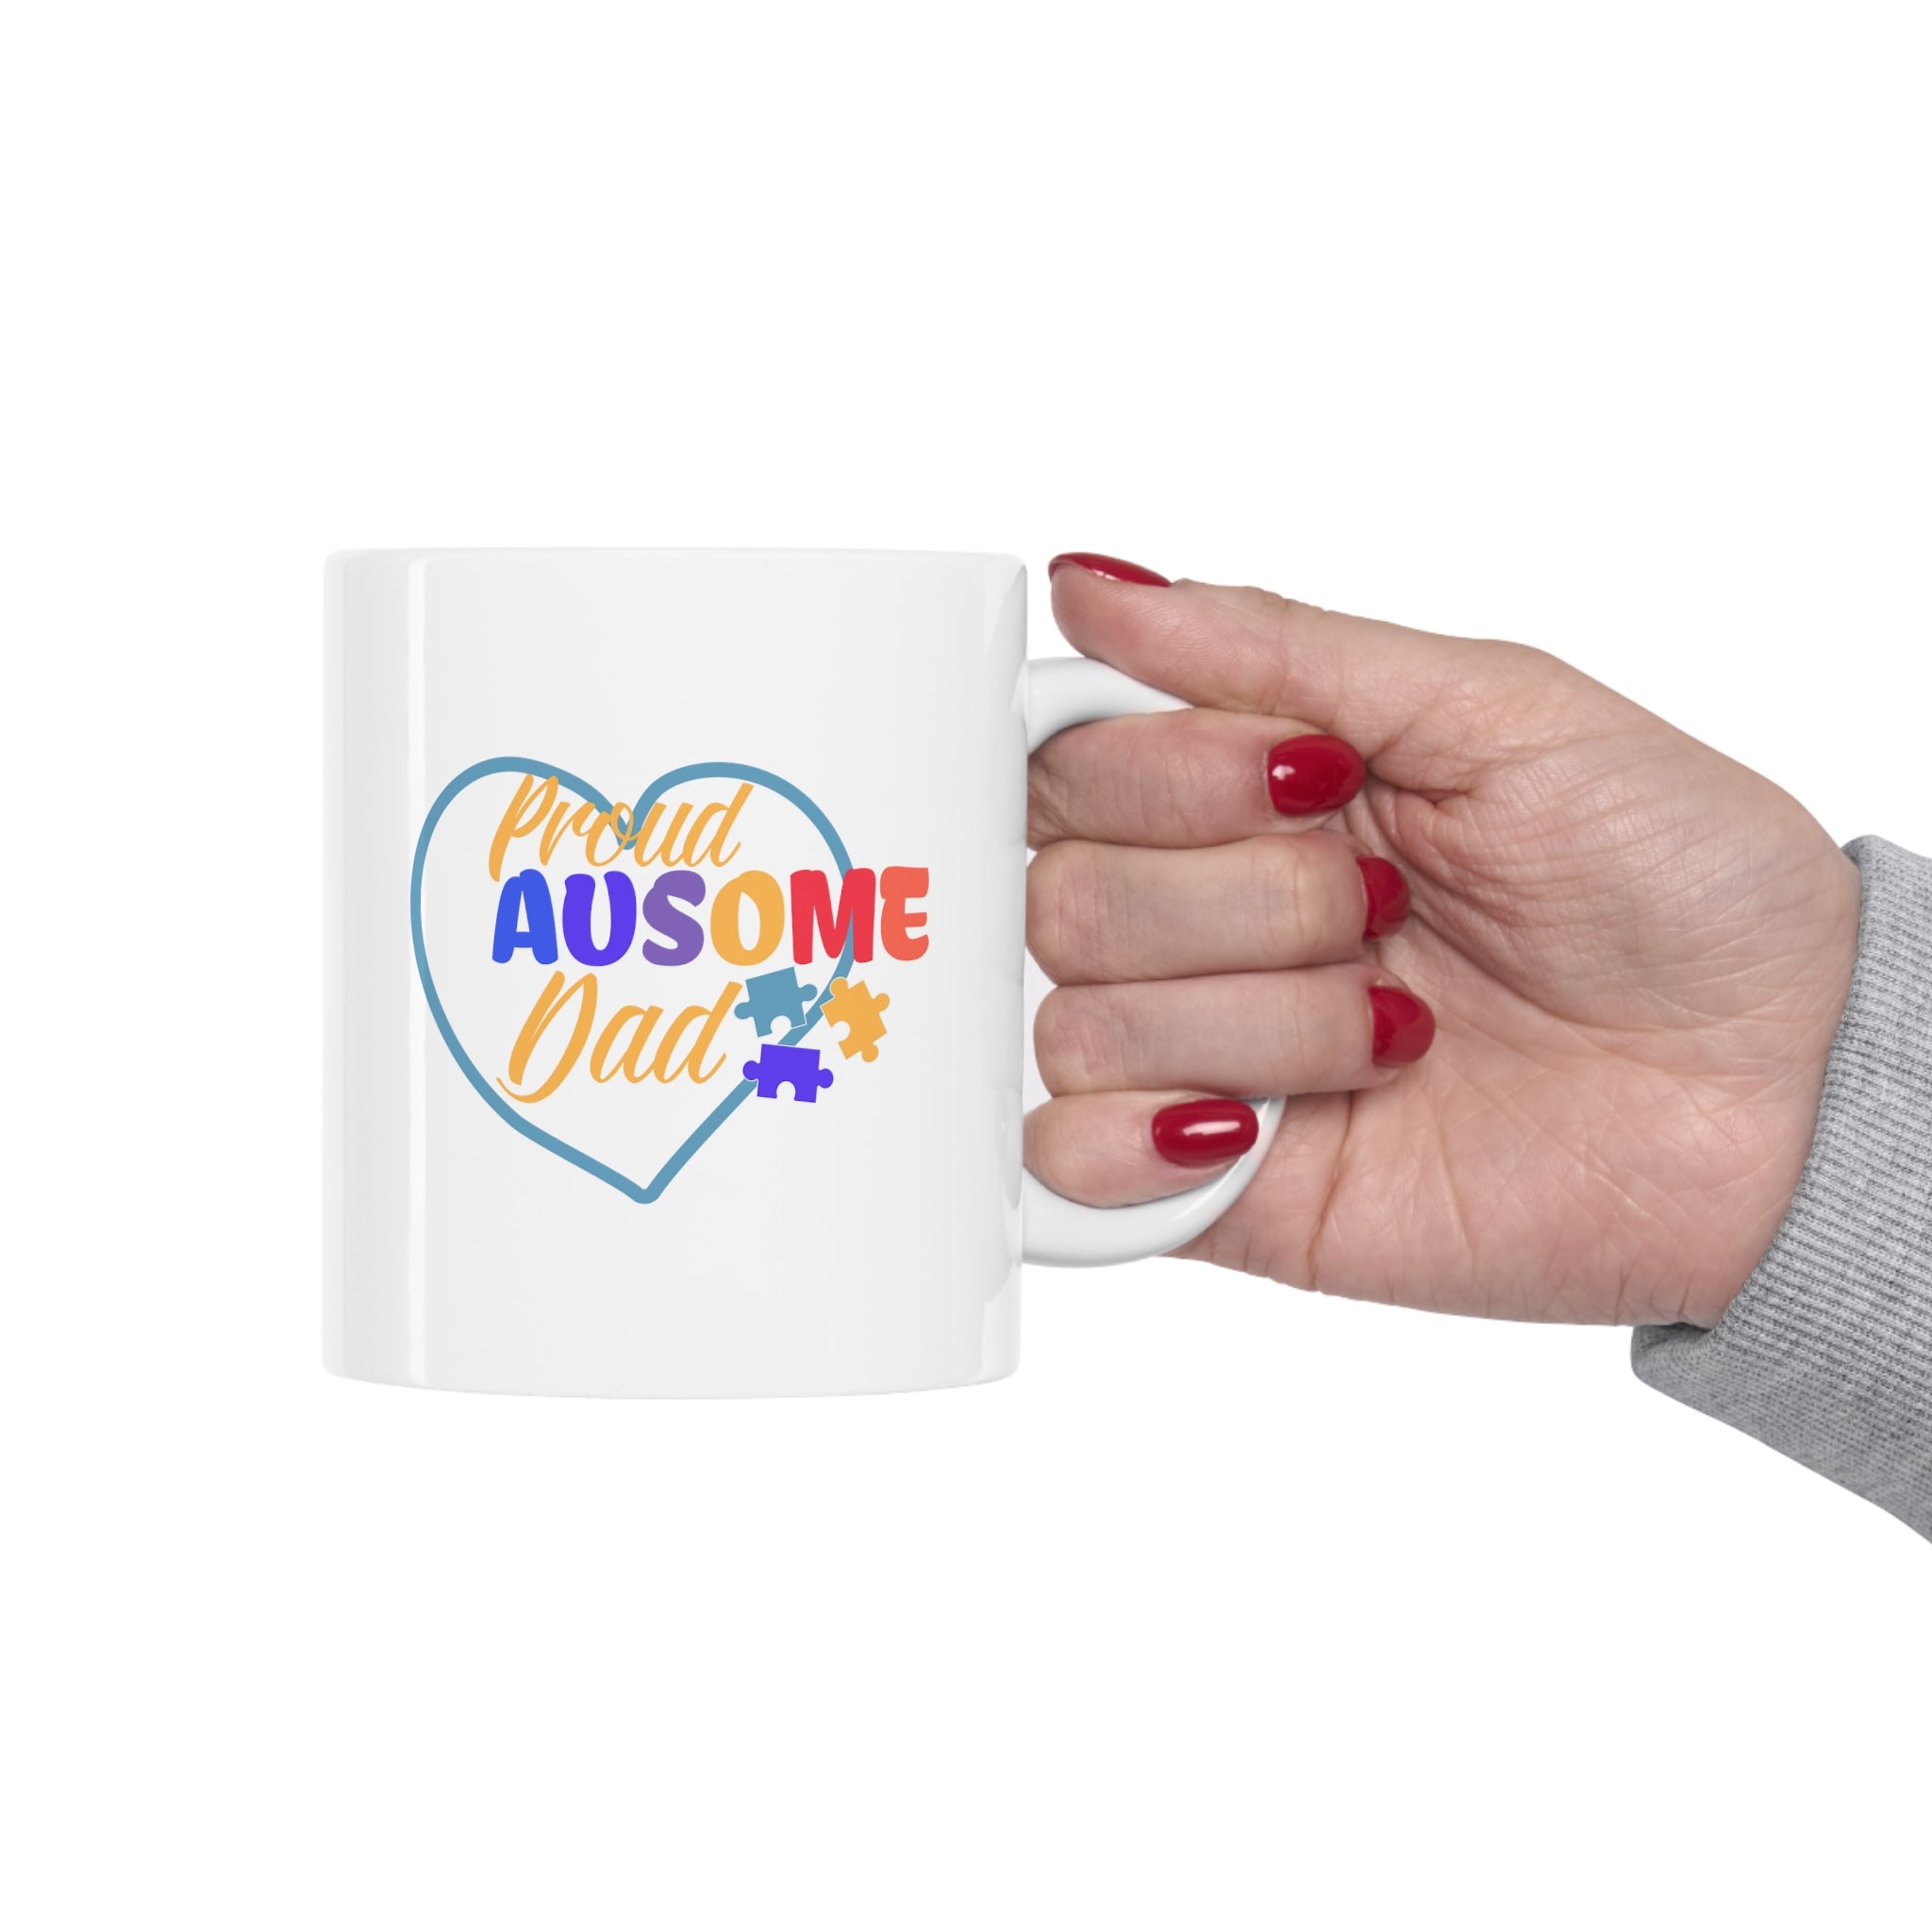 "Ausome Dad" Autism Awareness and Support Ceramic Mug 11oz: Celebrating Exceptional Fathers with Every Sip - A Heartfelt Tribute to Parenthood and Understanding